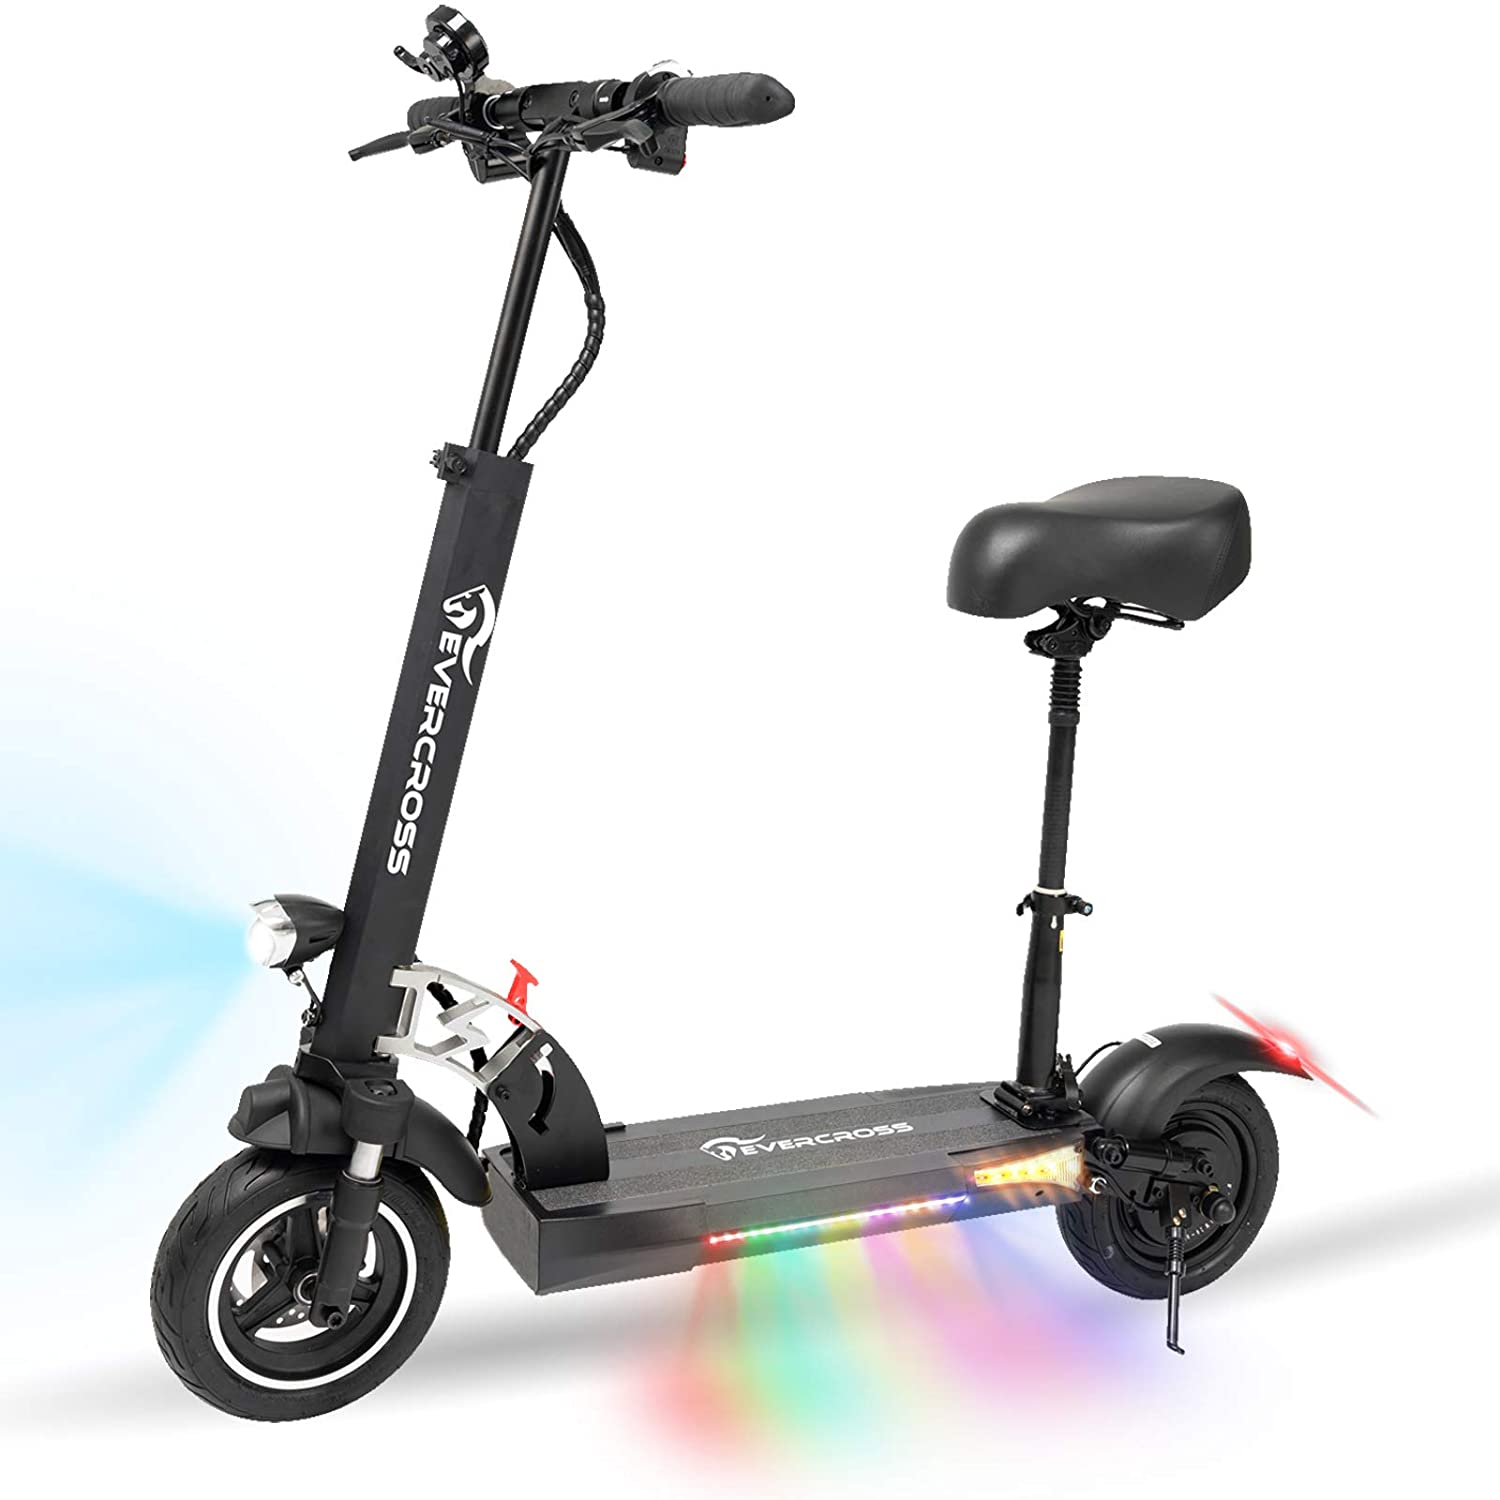 Evercross (800W) Off Road E Scooter For Heavy Persons